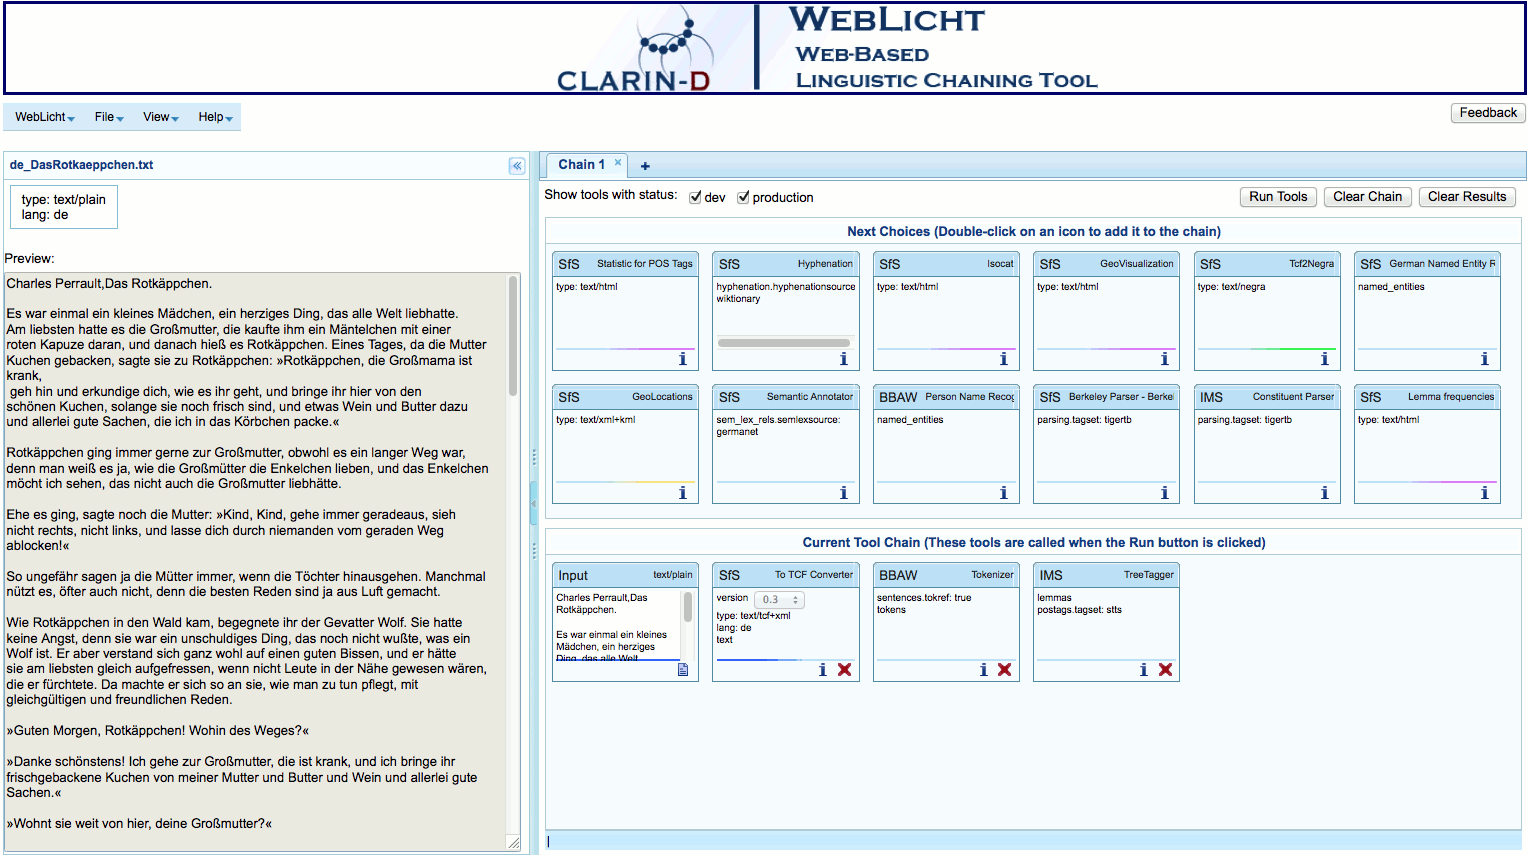 The WebLicht user interface, displayed in a browser